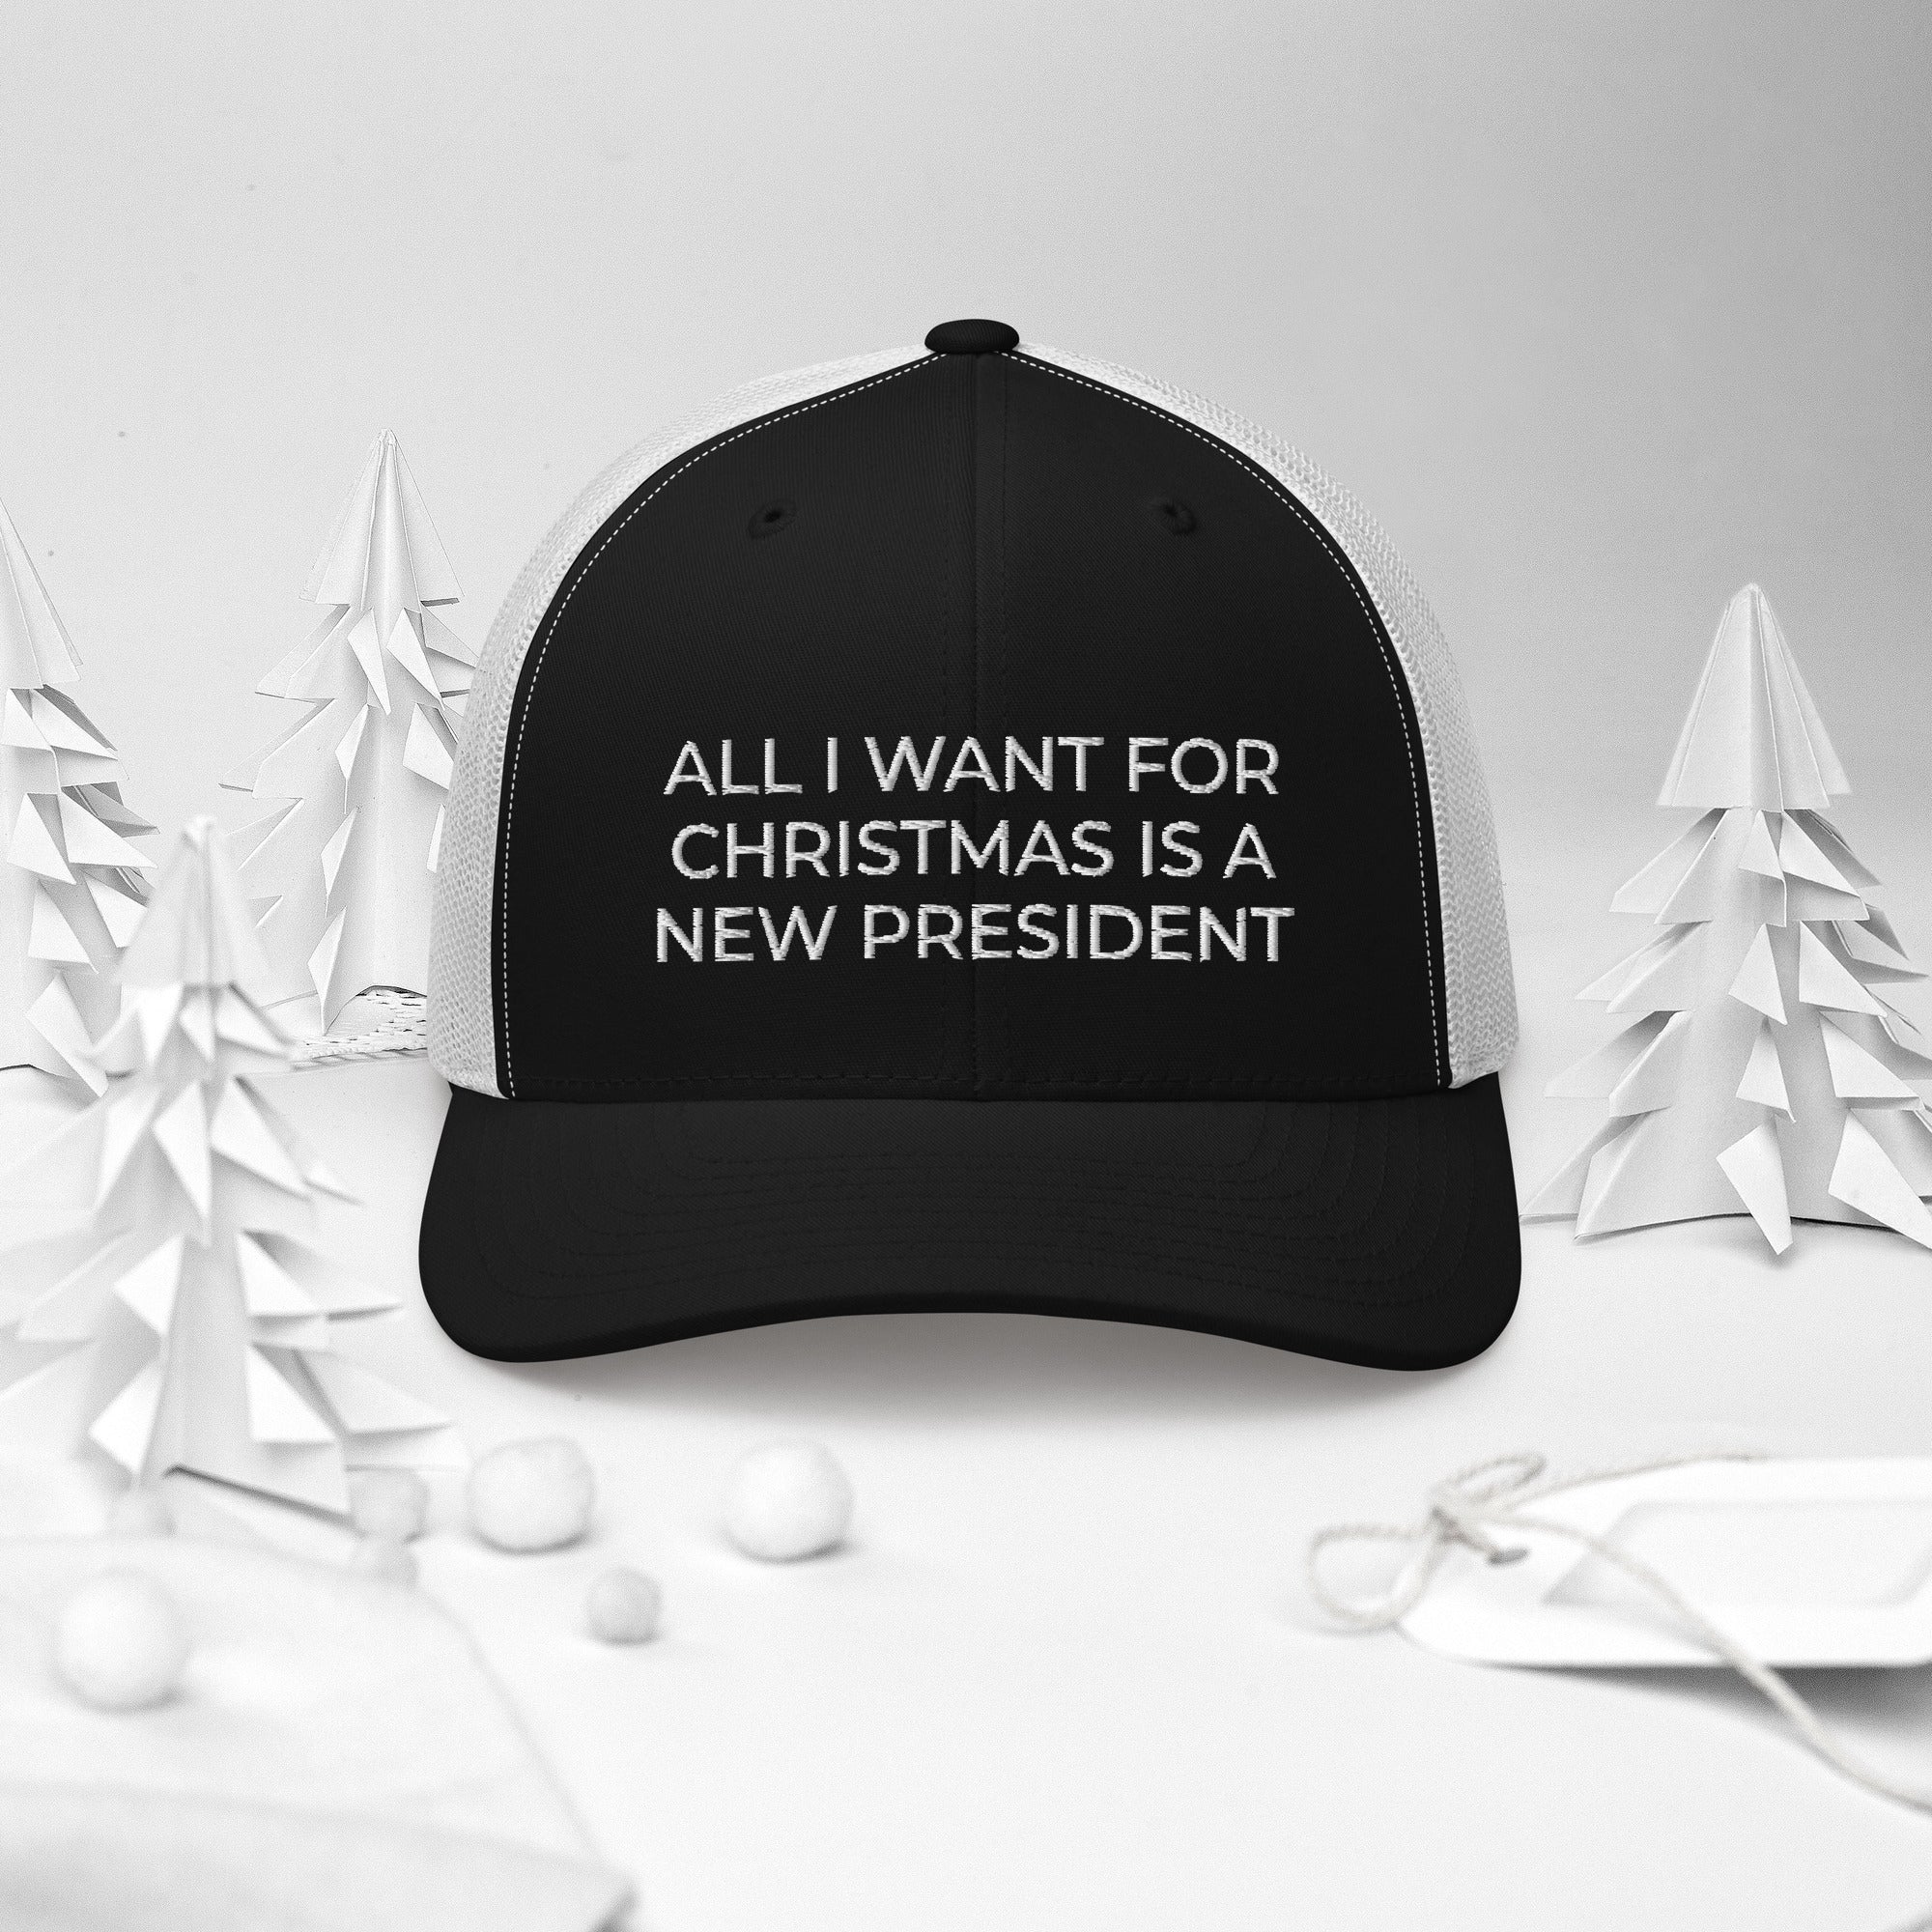 All I Want For Christmas Is A New President, FJB Christmas Trucker Hat, Anti Biden Christmas Cap, Conservative Hat, FJB Hat, Patriot Xmas - Madeinsea©